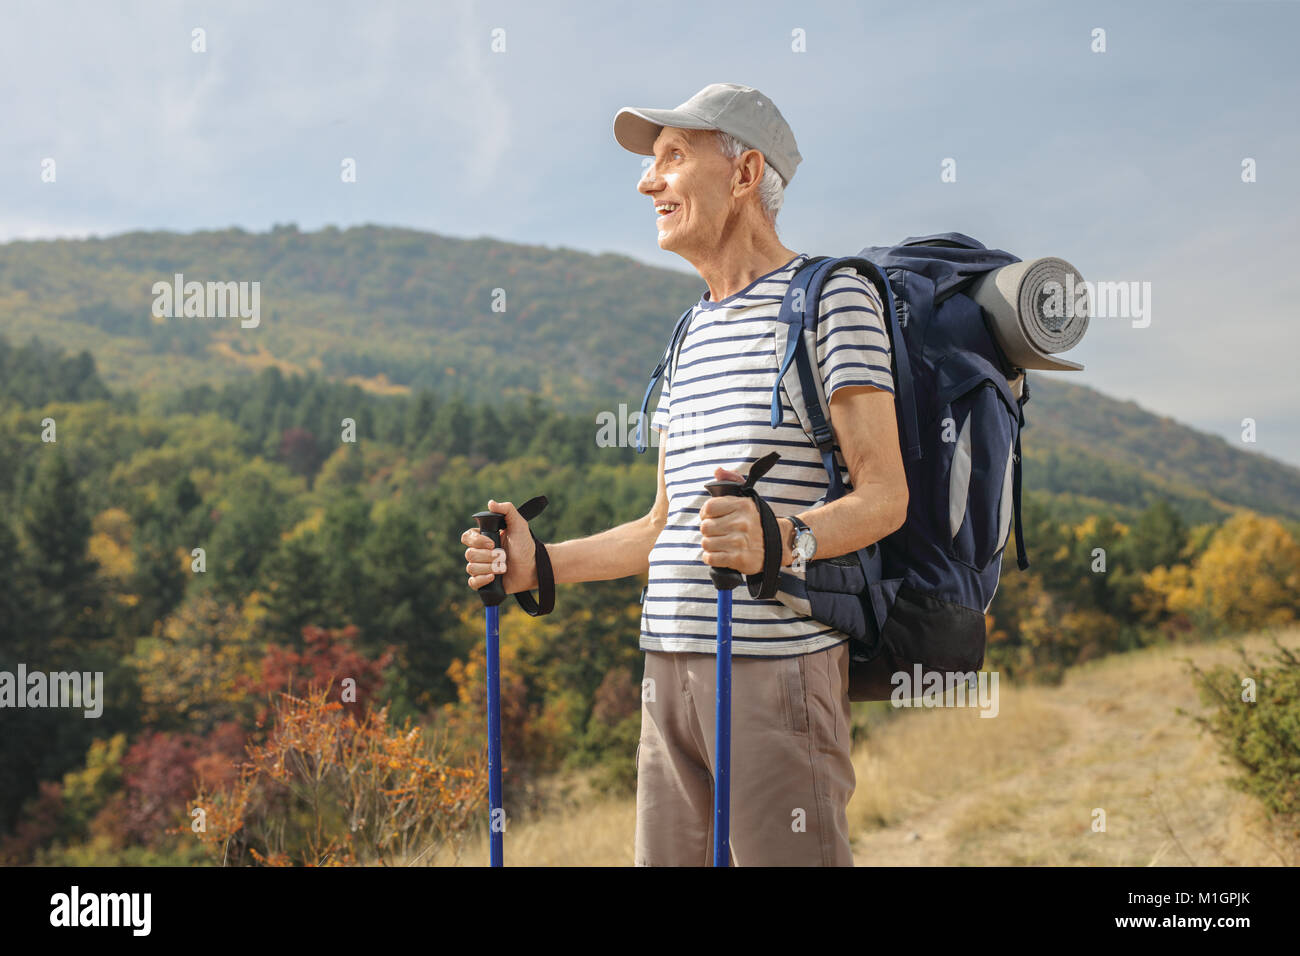 Elderly hiker with hiking poles and a backpack looking away outdoors Stock Photo